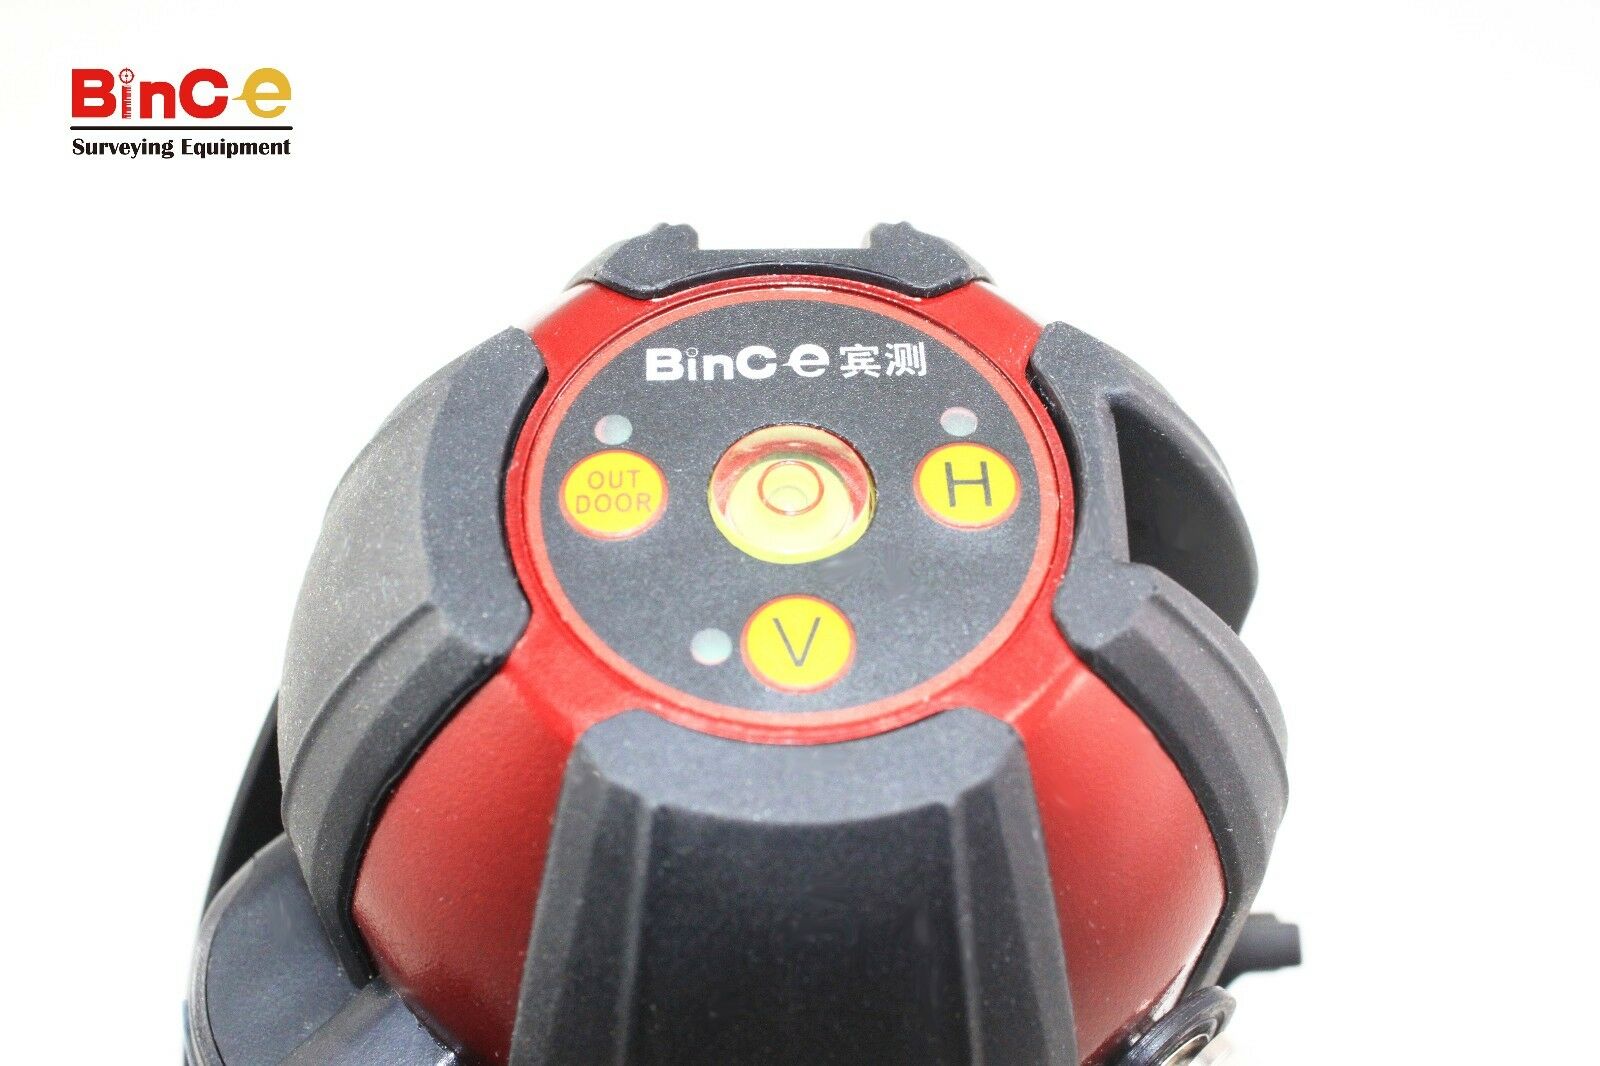 BC-A3 Cross Line Rotary Laser Level Red Beam 2V1H3D Self Leveling Rotating